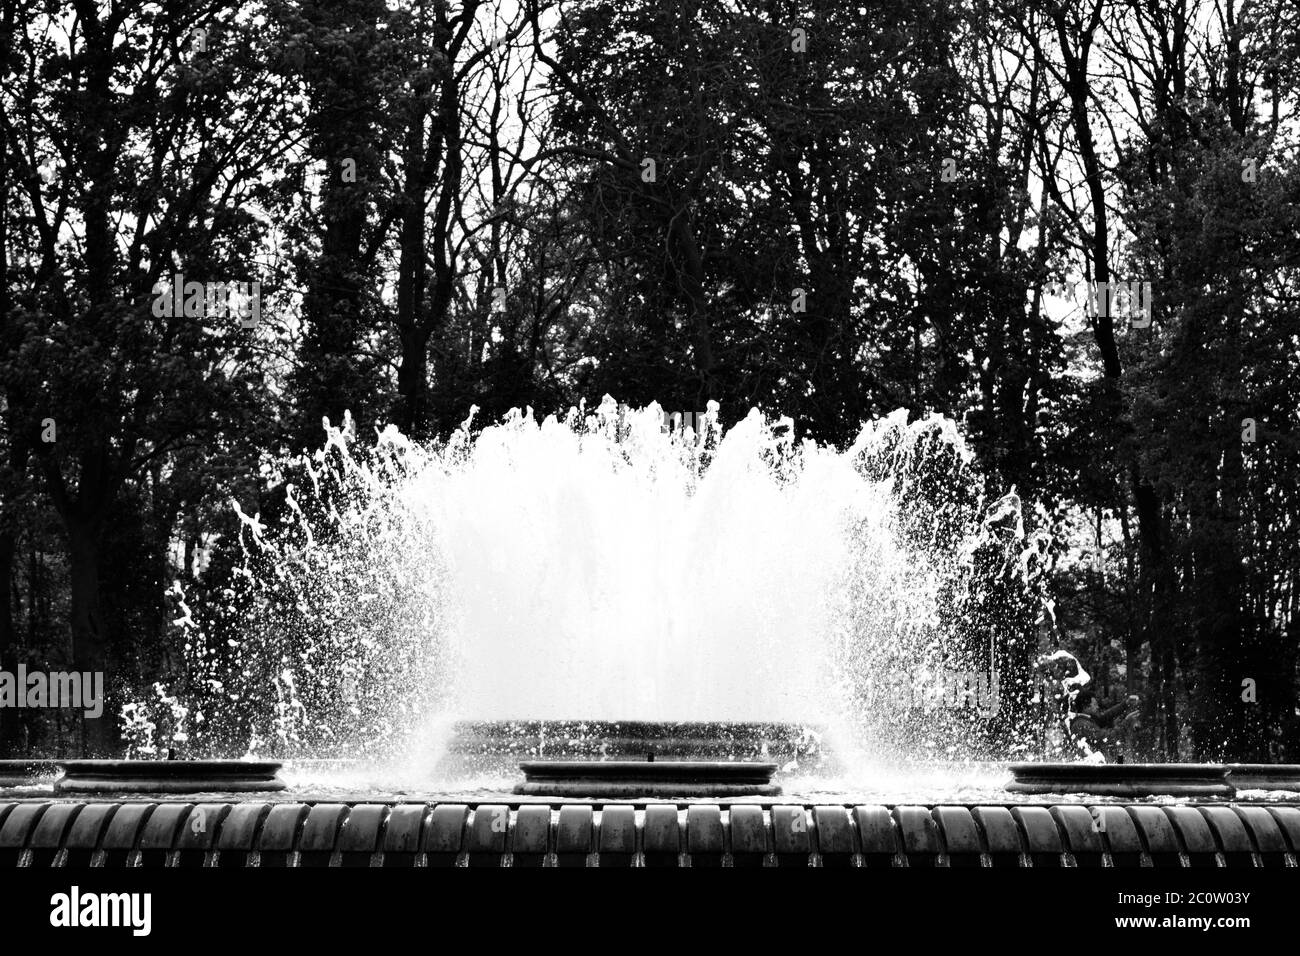 Water Fountain Black and White Photo with trees in the background Stock Photo